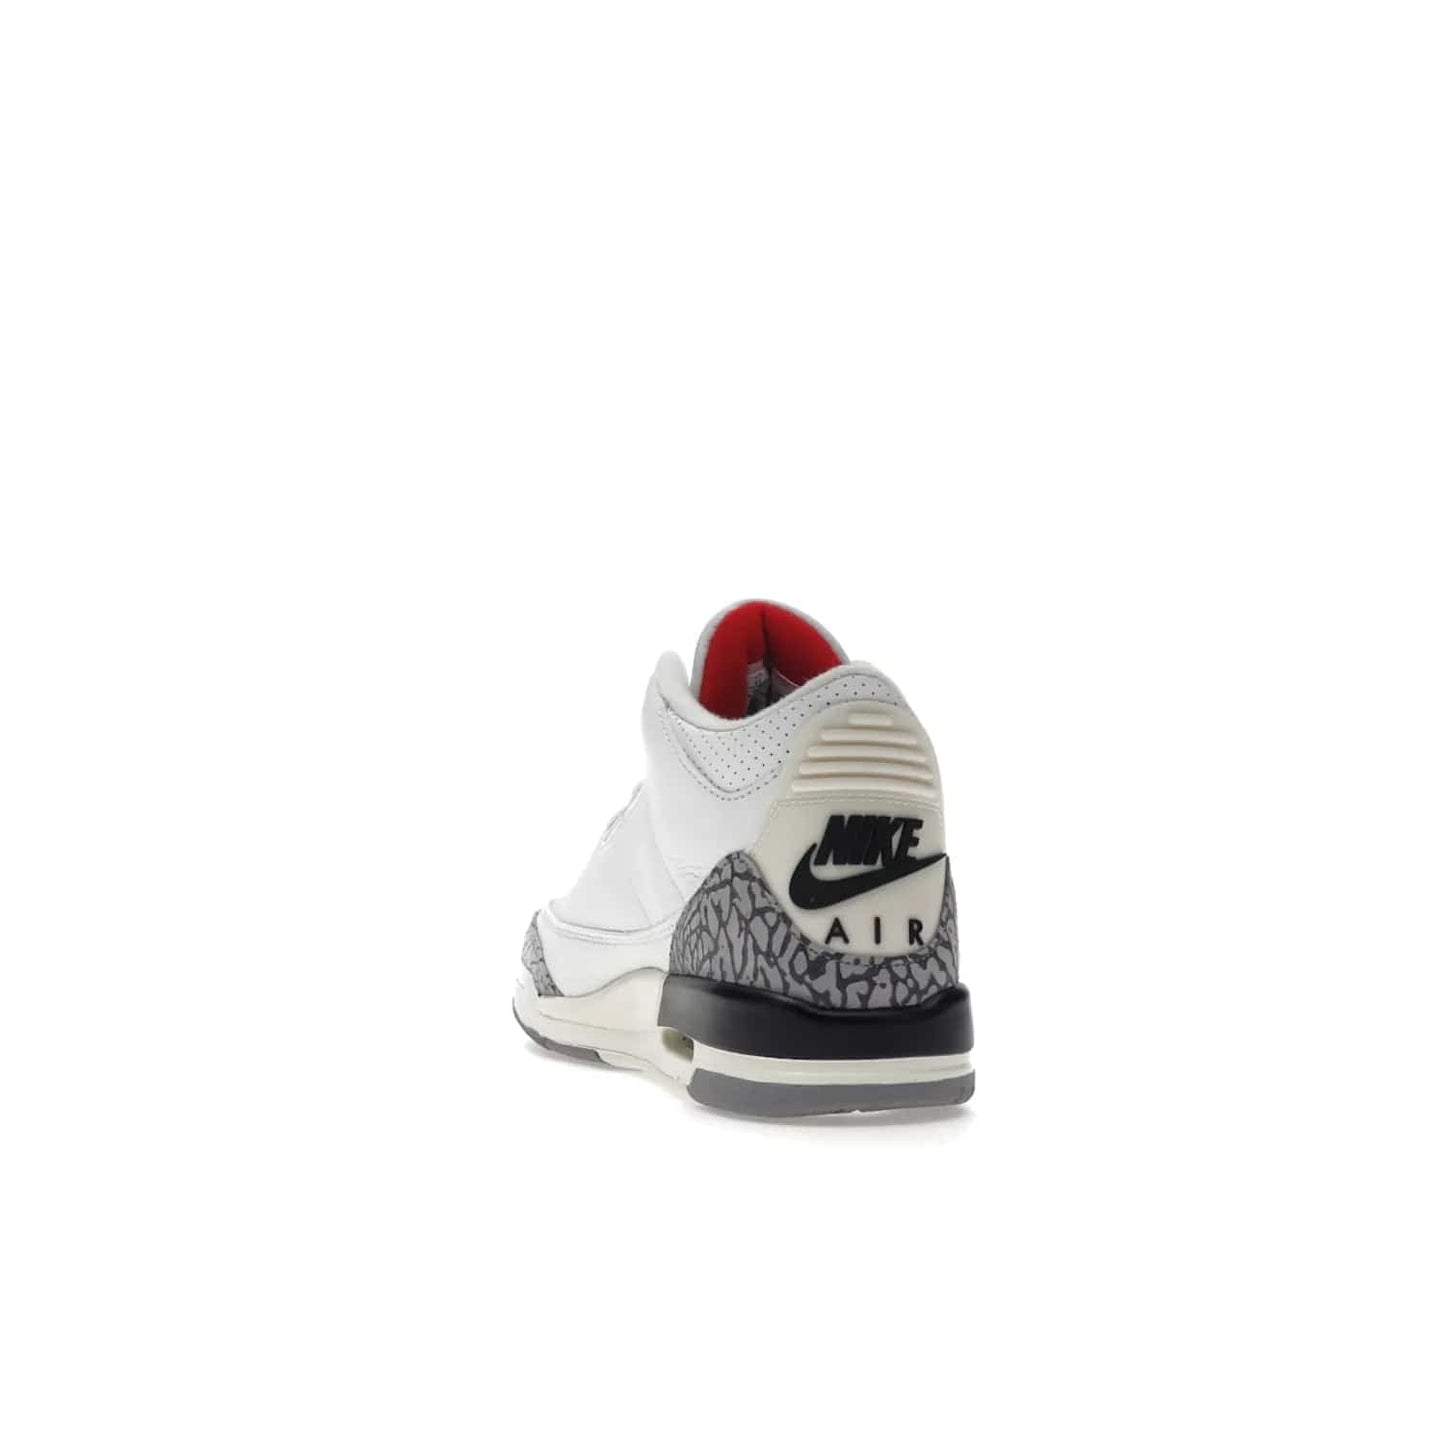 Jordan 3 Retro White Cement Reimagined (GS) - Image 26 - Only at www.BallersClubKickz.com - Grab the perfect blend of modern design and classic style with the Jordan 3 Retro White Cement Reimagined (GS). Features Summit White, Fire Red, Black, and Cement Grey colorway, iconic Jordan logo embroidered on the tongue, and “Nike Air” branding. Limited availability, get your pair before March 11th 2023.